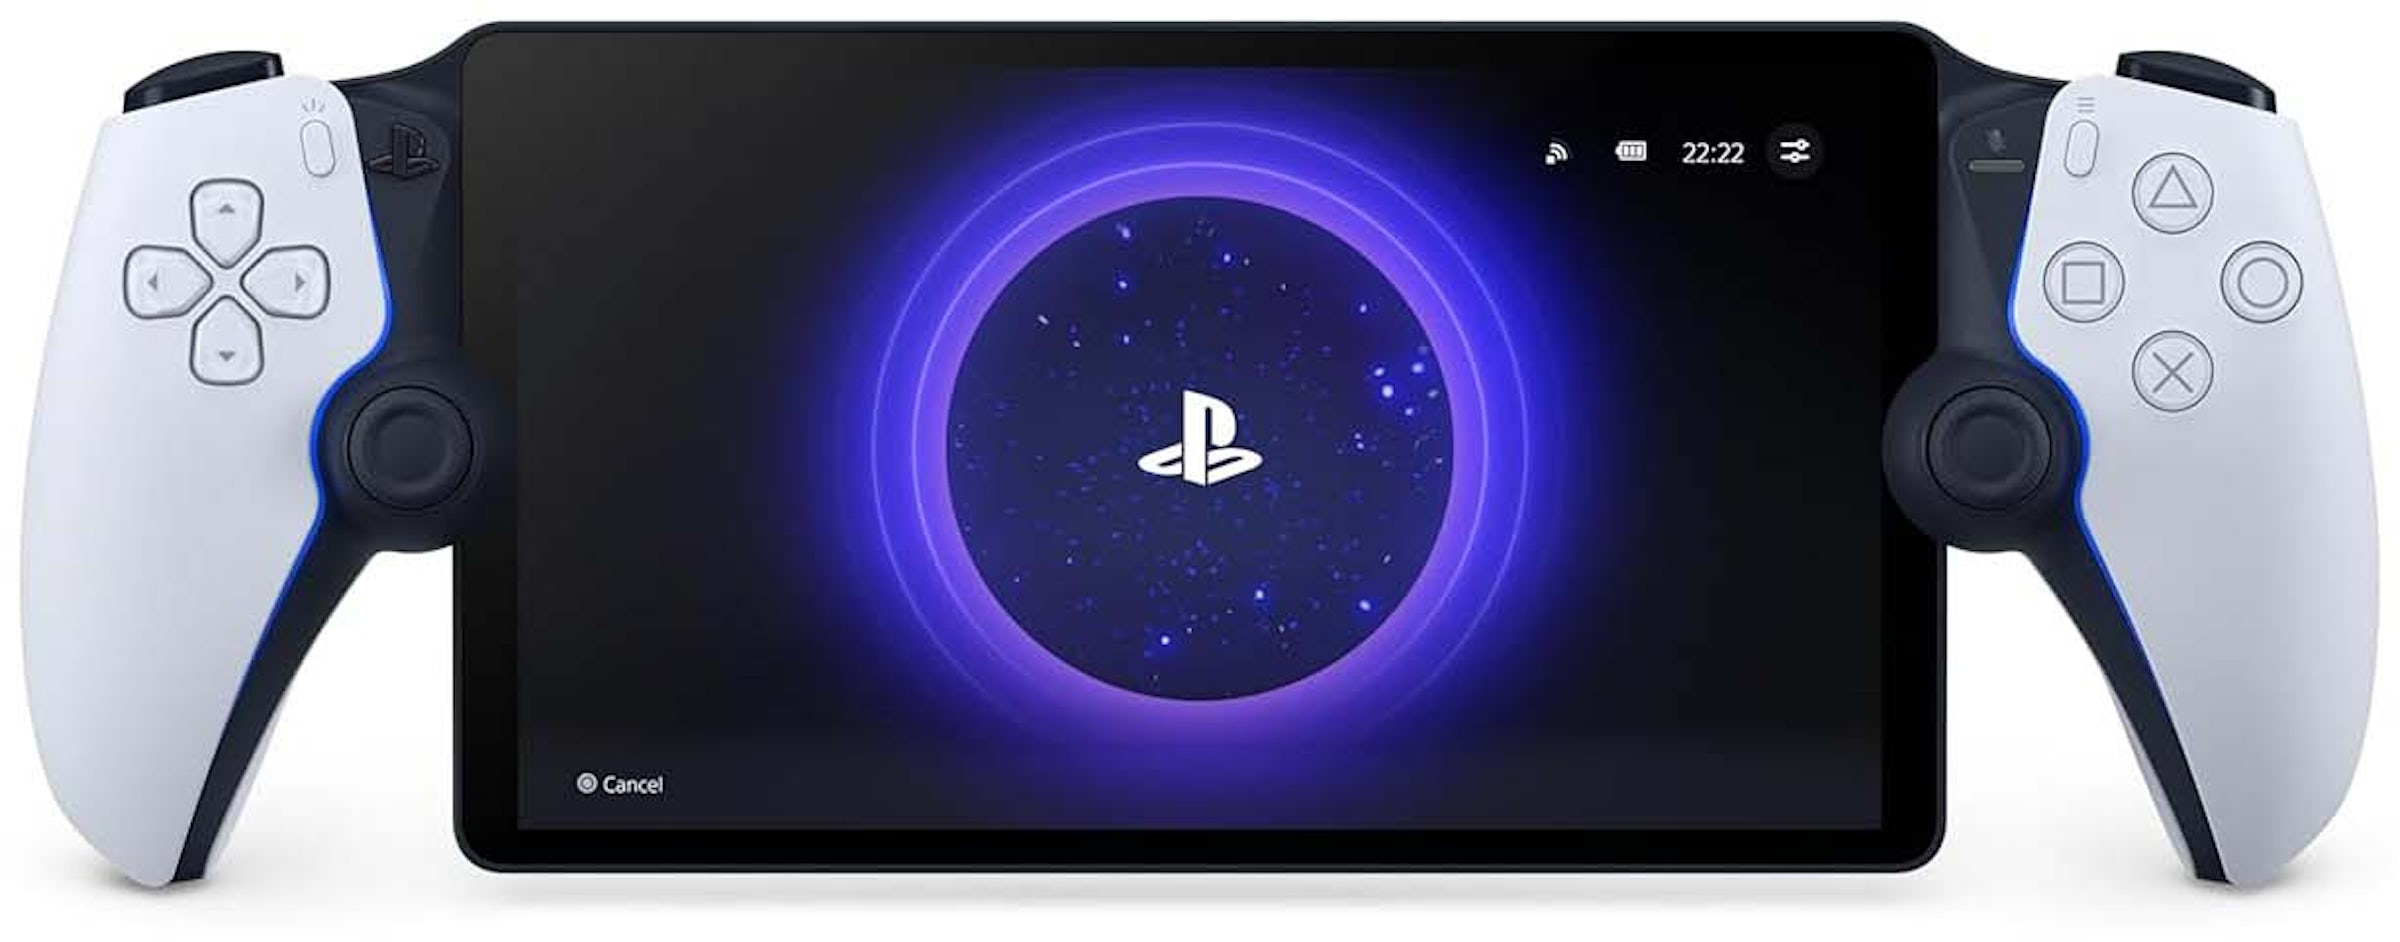 Sony to Launch Handheld PlayStation Q-Lite After PS5 Pro